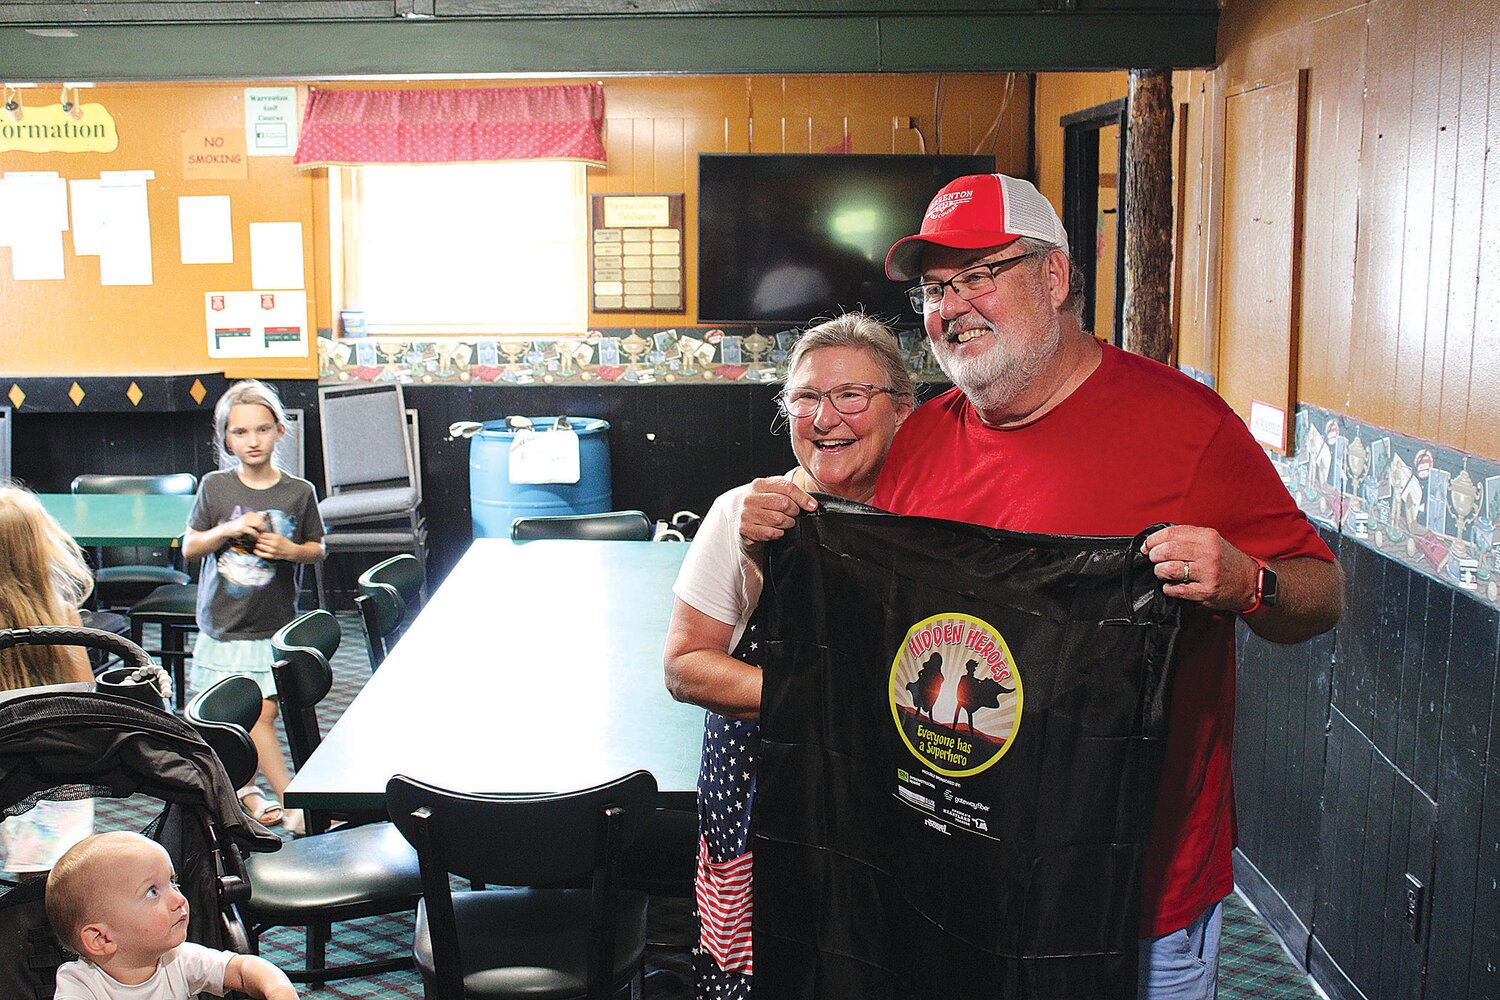 Rich Barton was honored as a Hidden Hero by the Warren County Record. Here he poses with his cape and his wife, Heidi.